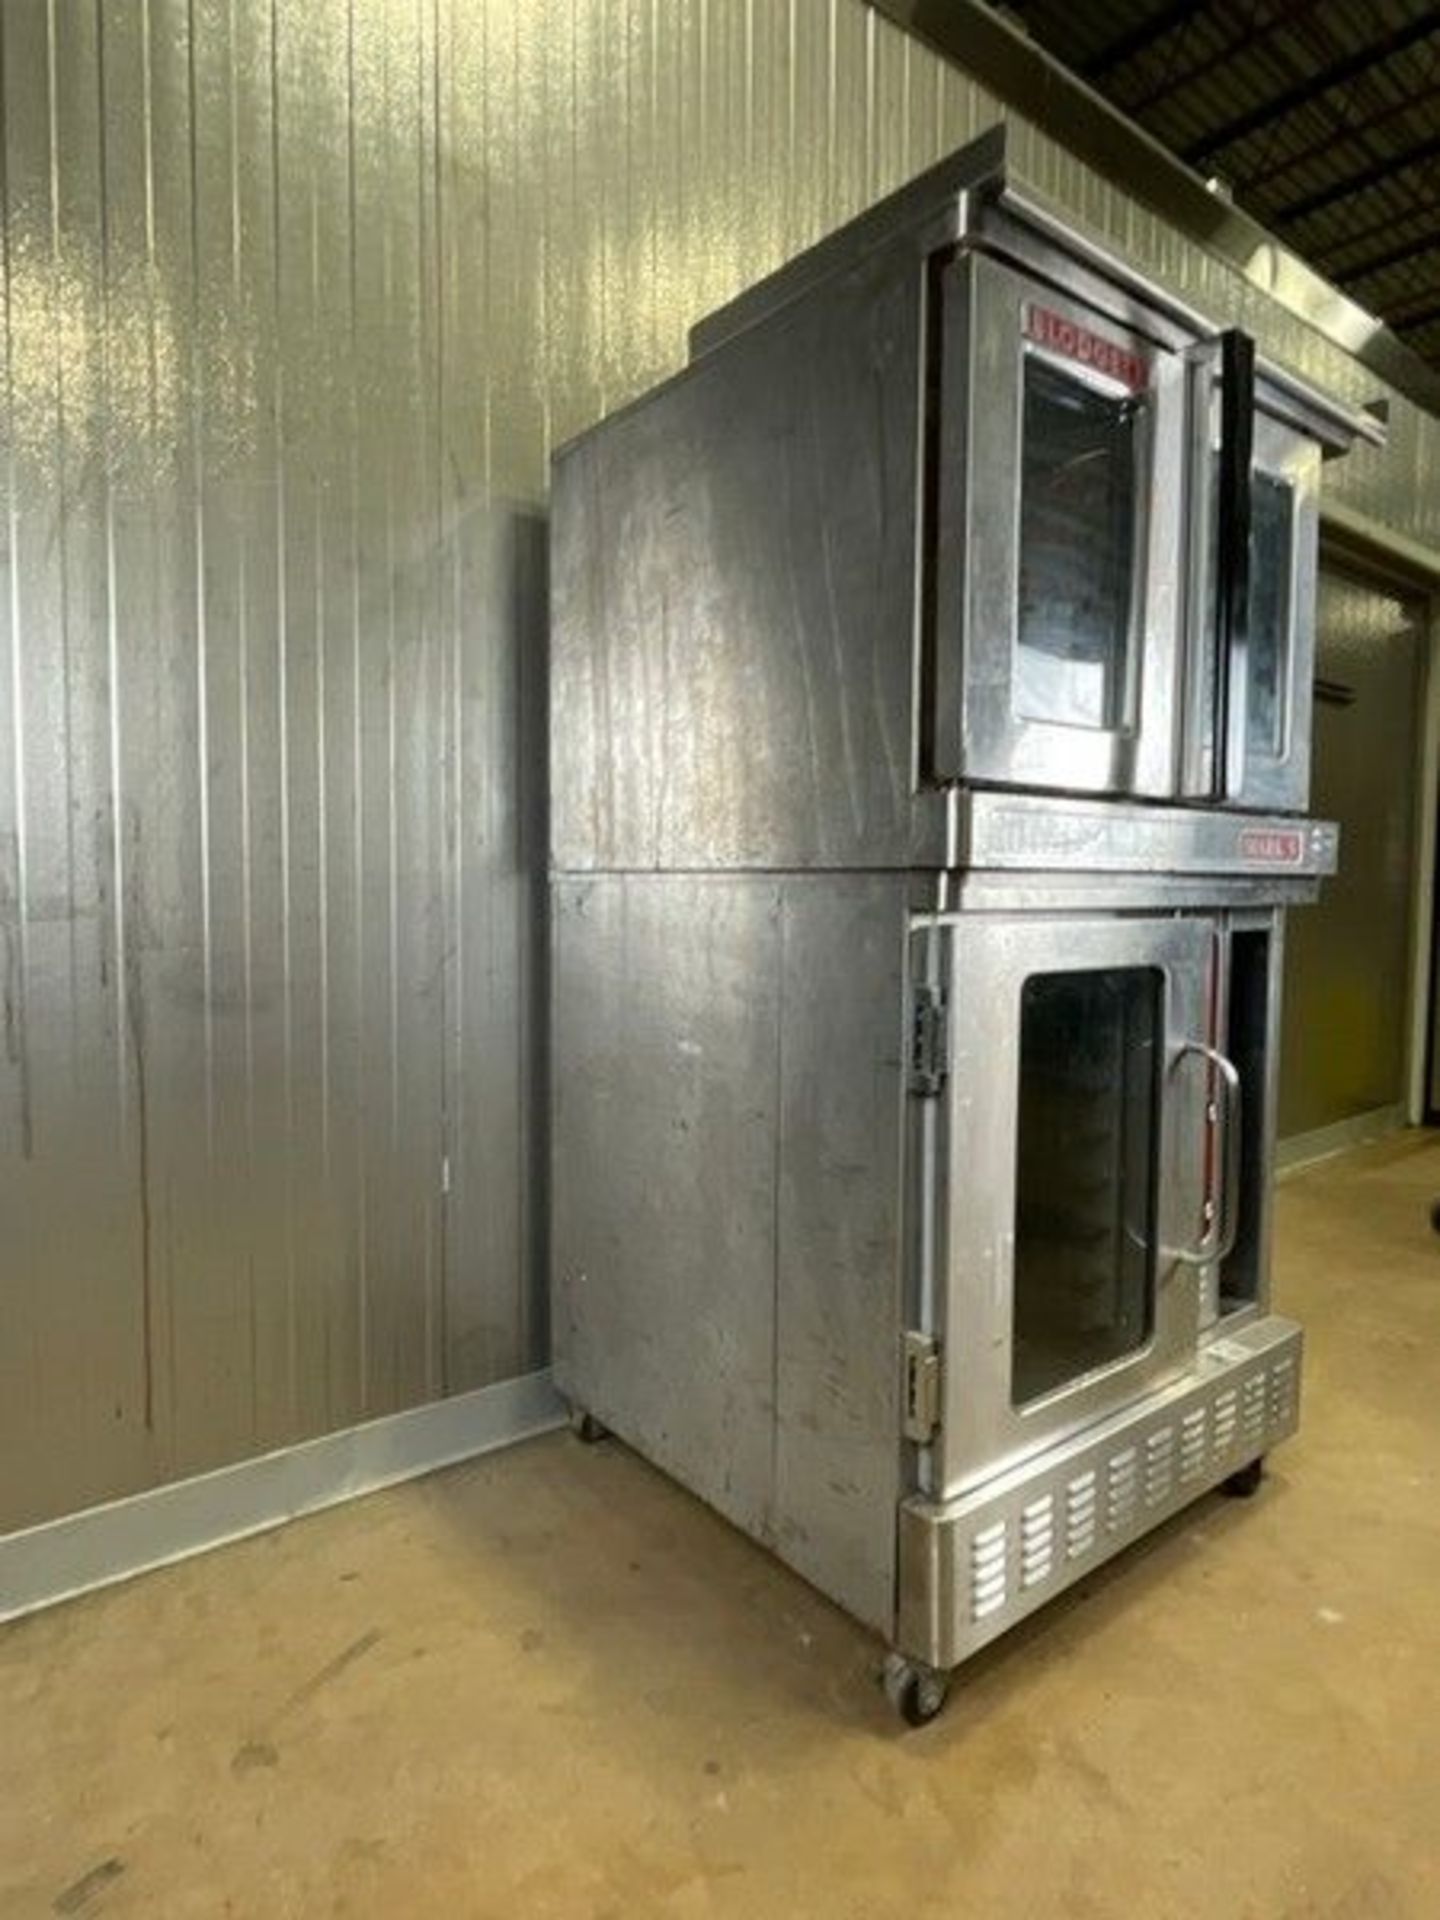 Blodgett Oven & Proofer, 230 Volts, 1 Phase, Proofer is Bottom Portion of Unit (Auction ID da67e738) - Image 4 of 6